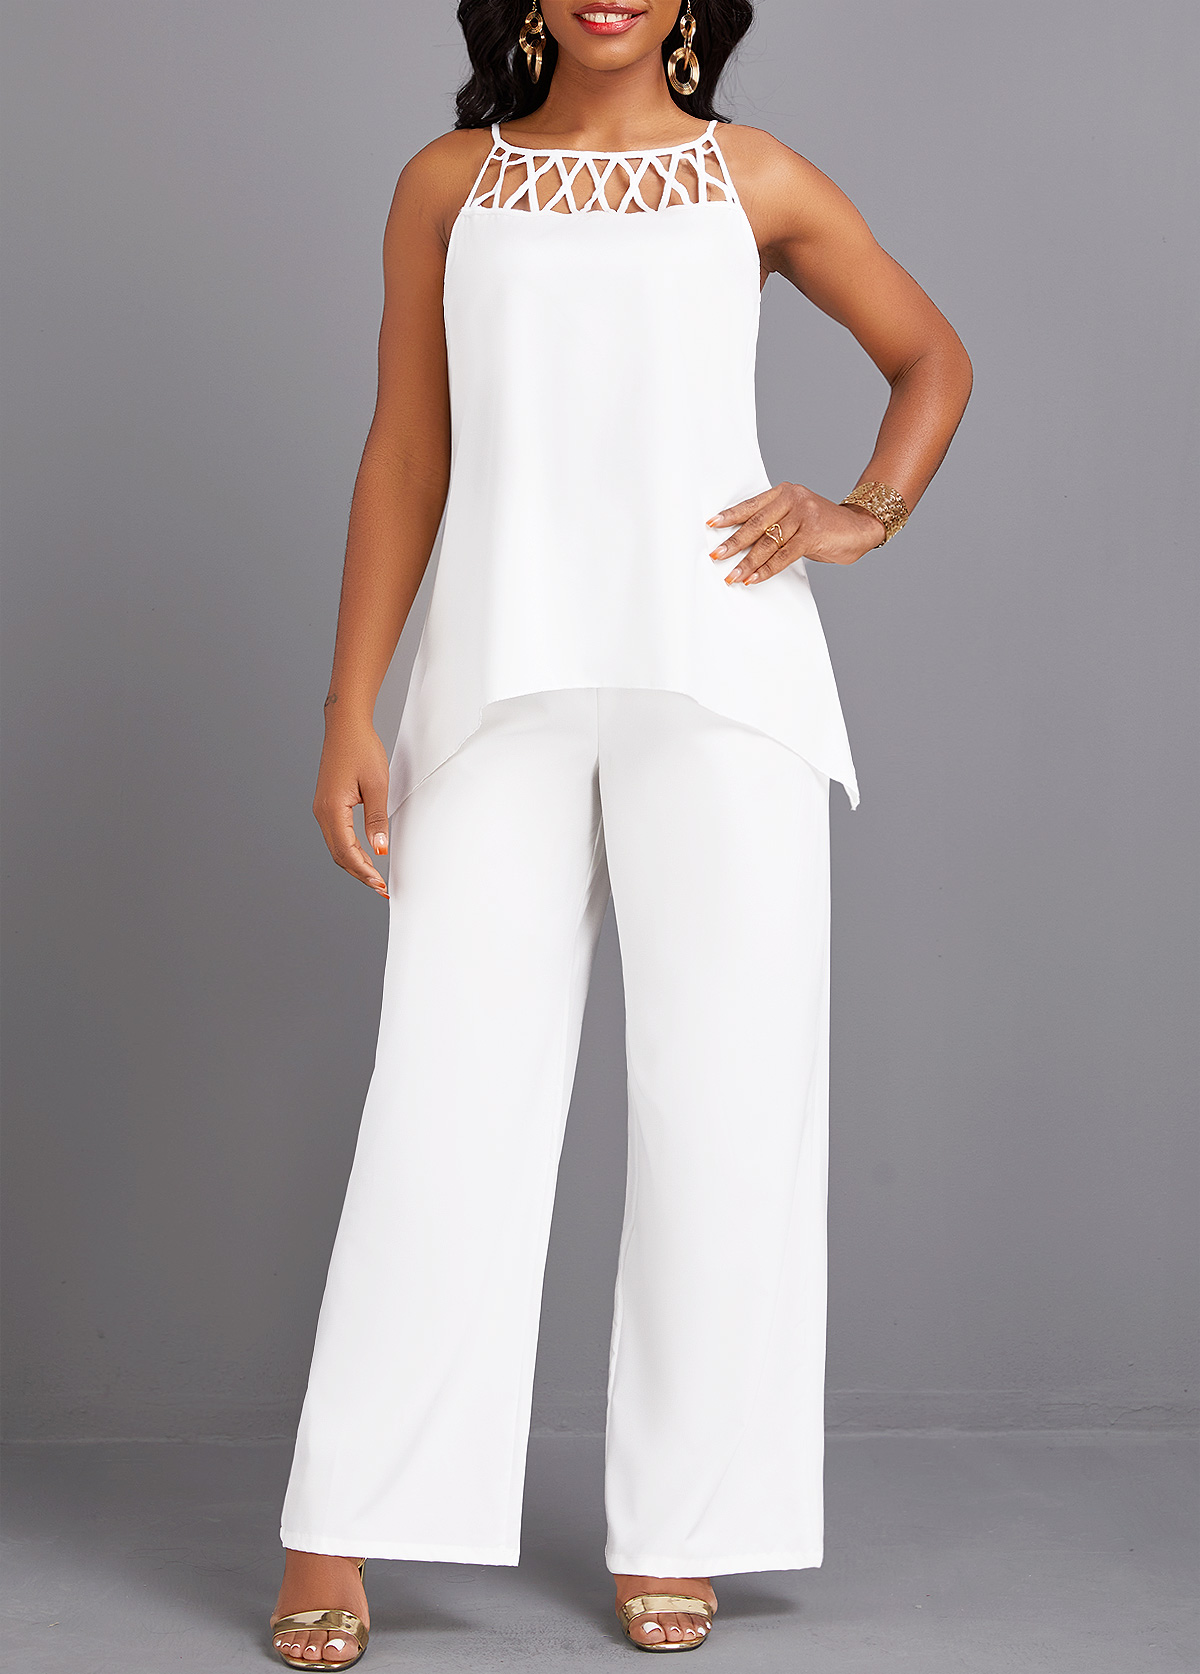 Sleeveless Cage Neck White Long Top and Pants